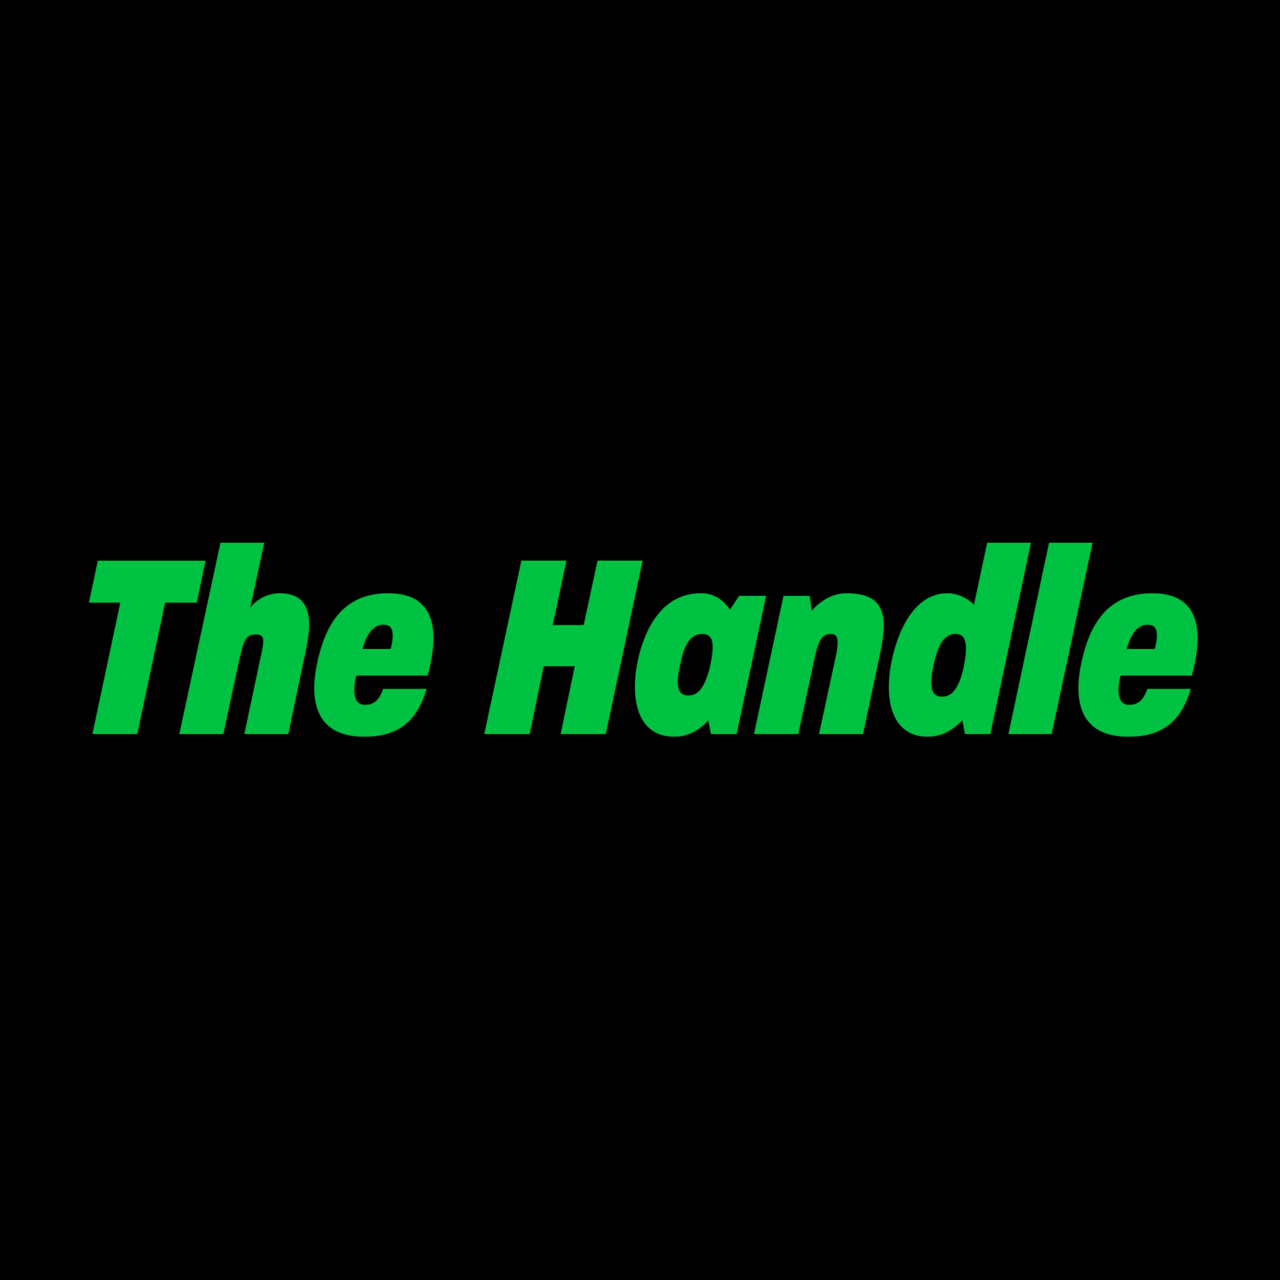 Artwork for The Handle